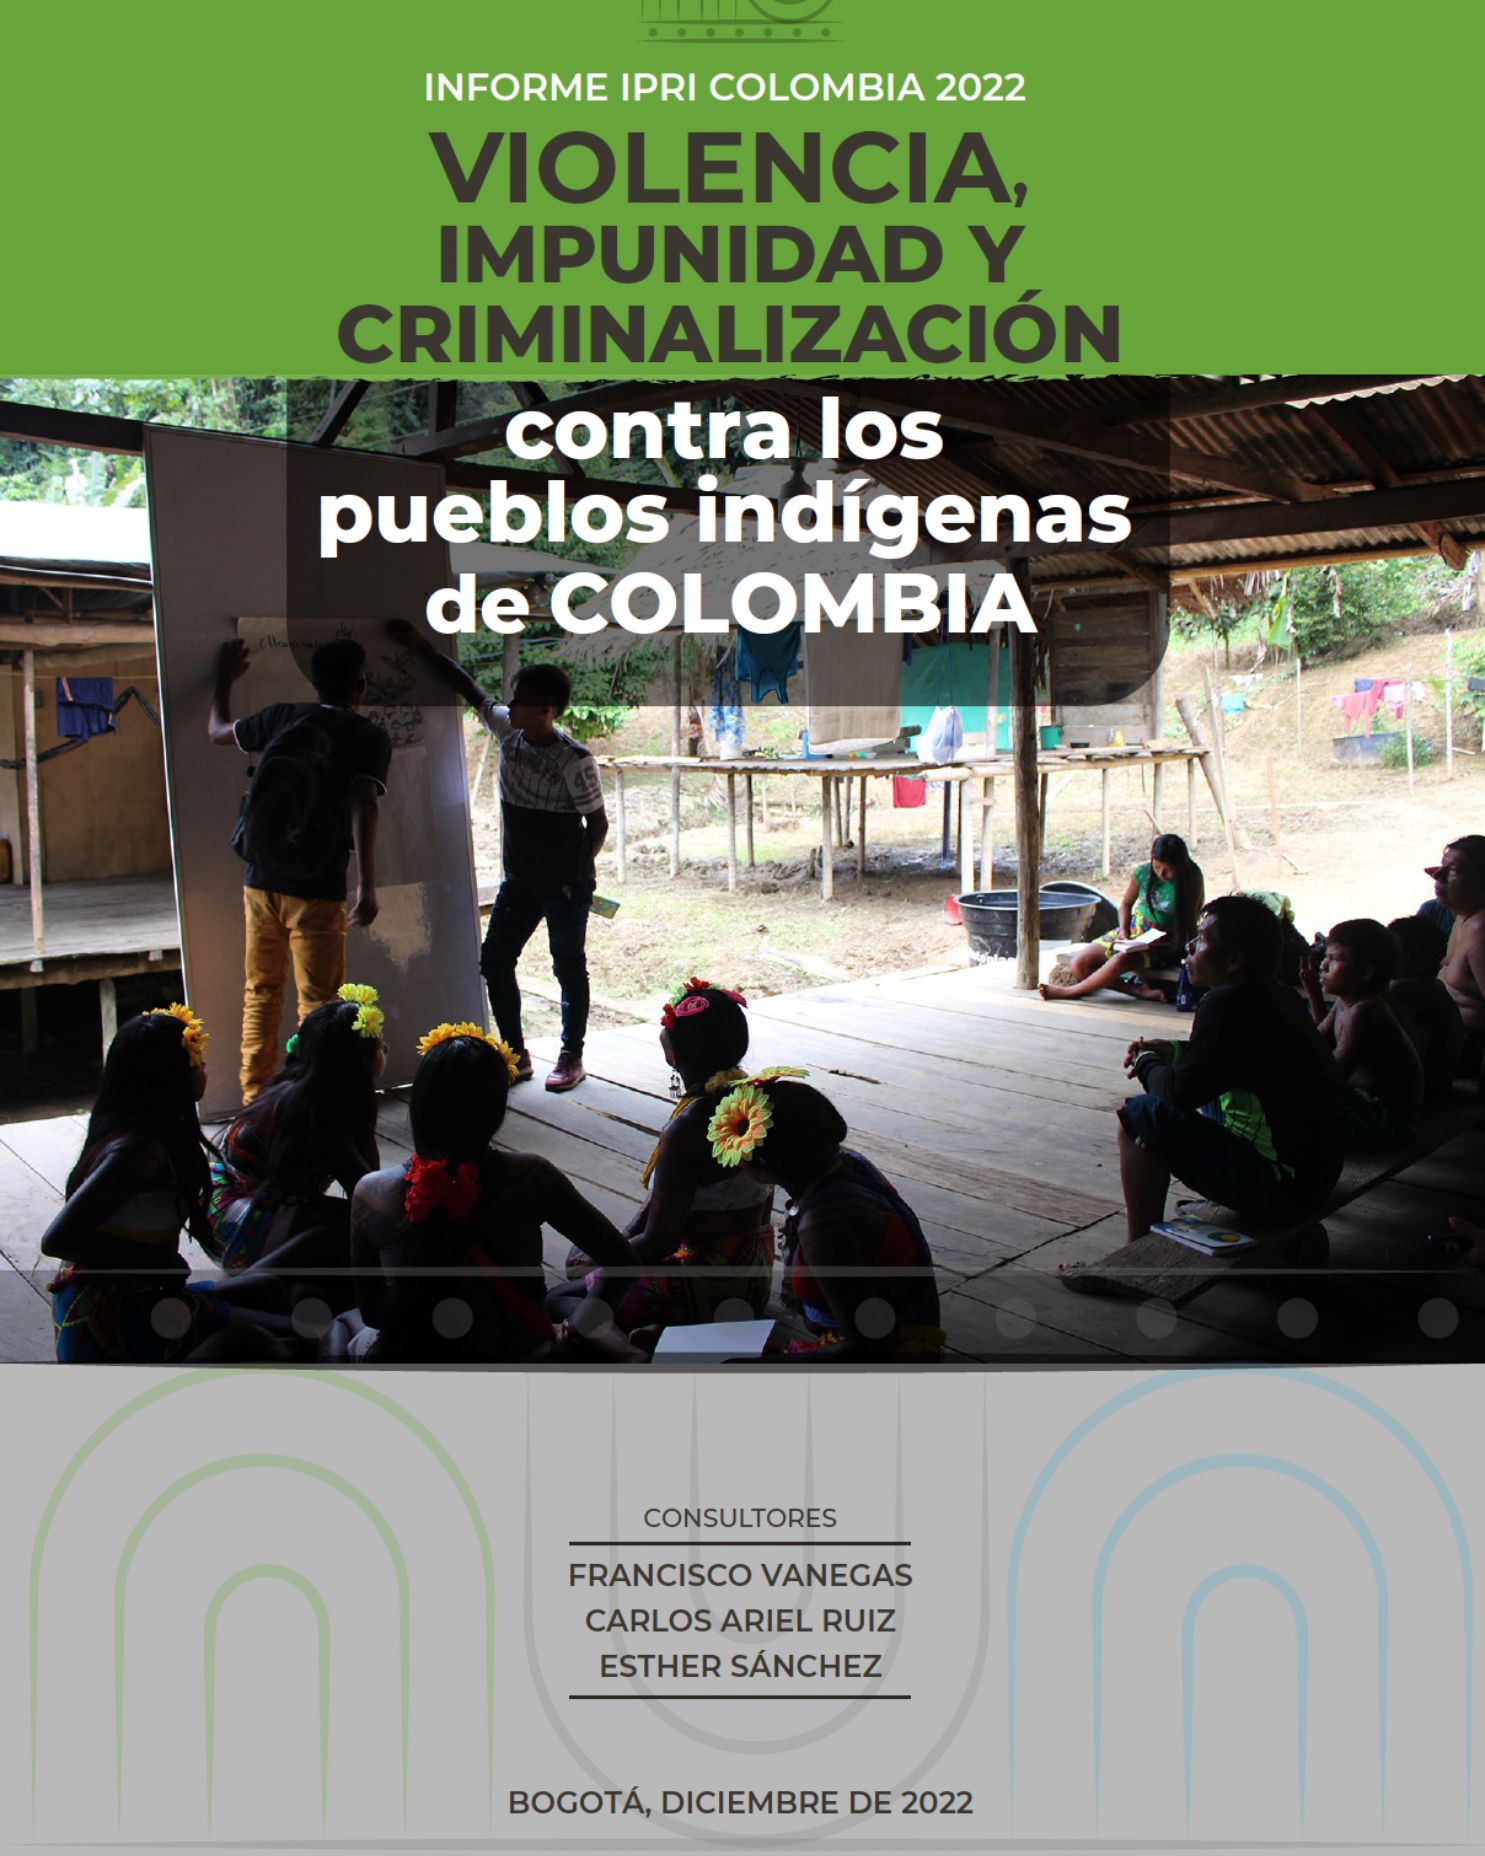 Violence, impunity and criminalization against Indigenous Peoples in Colombia